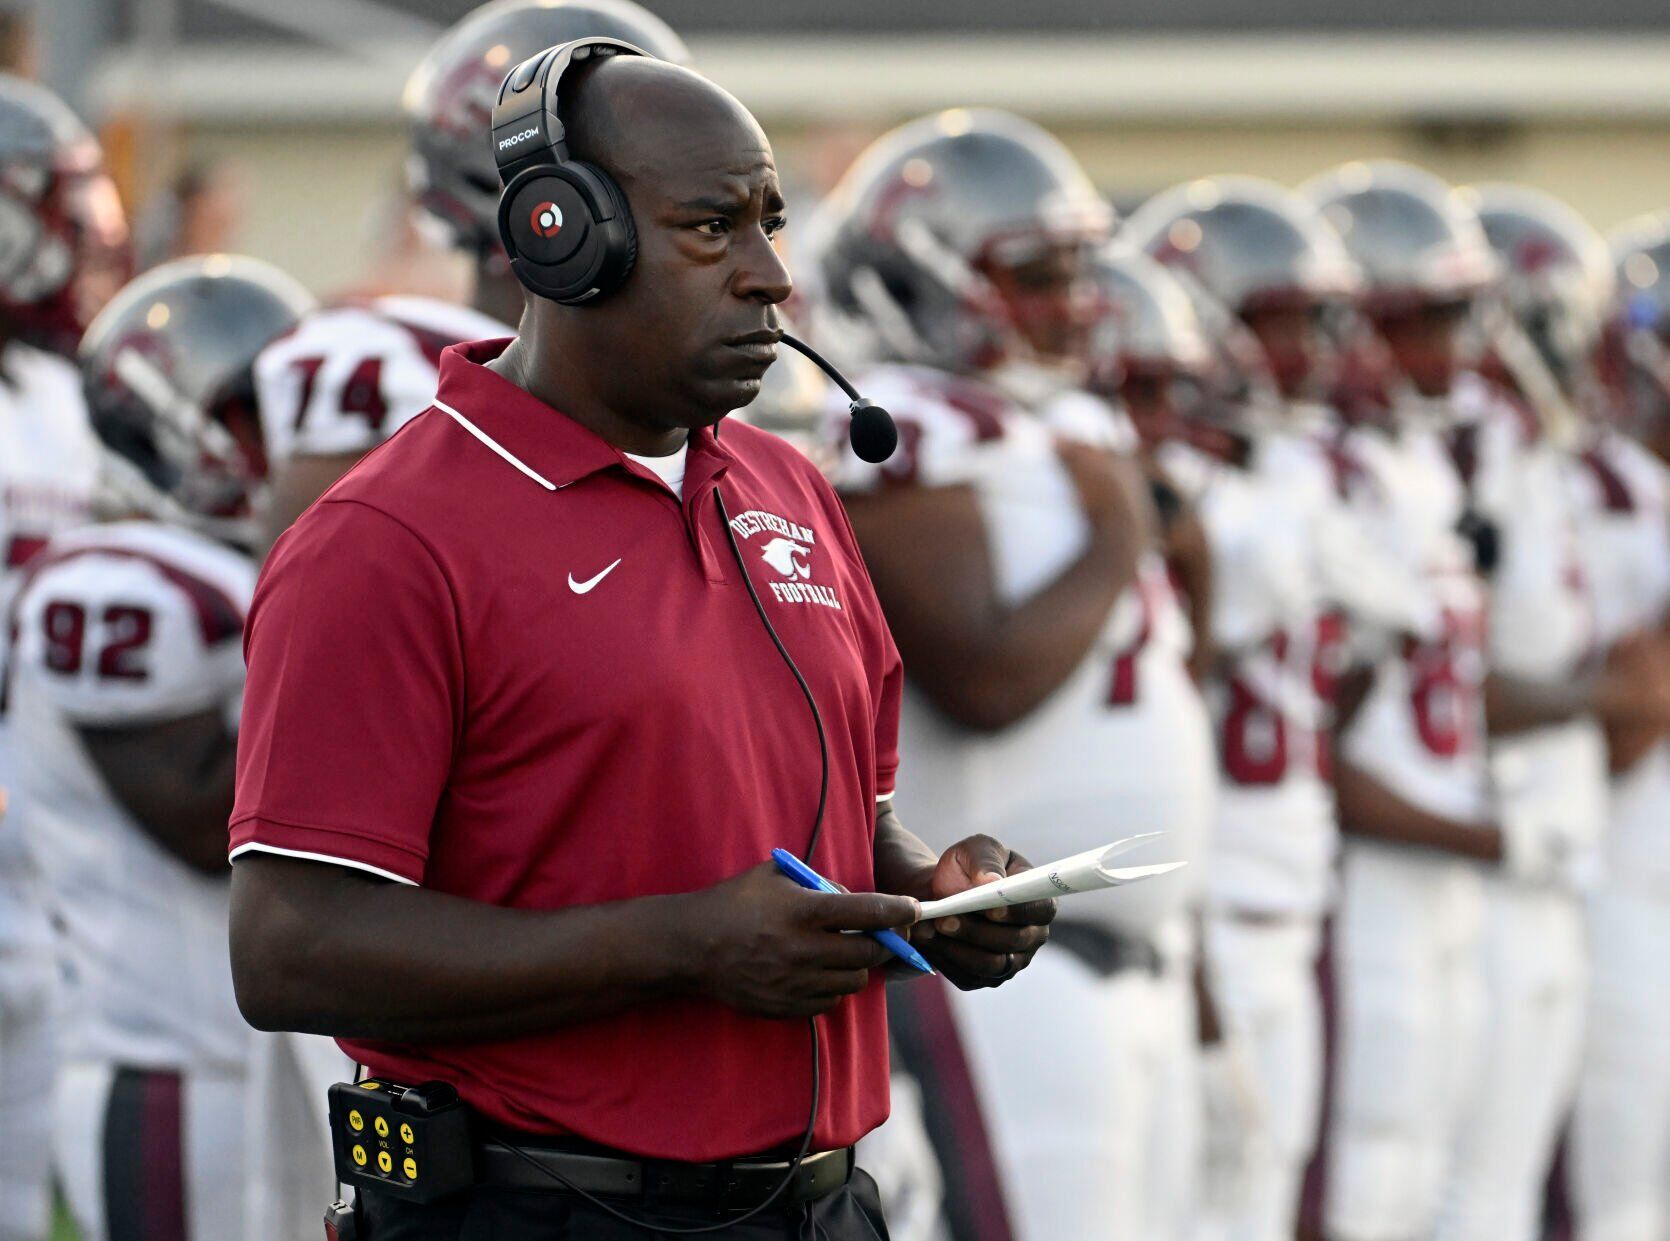 Destrehan’s ‘emotional’ playoff win comes without coach on sideline